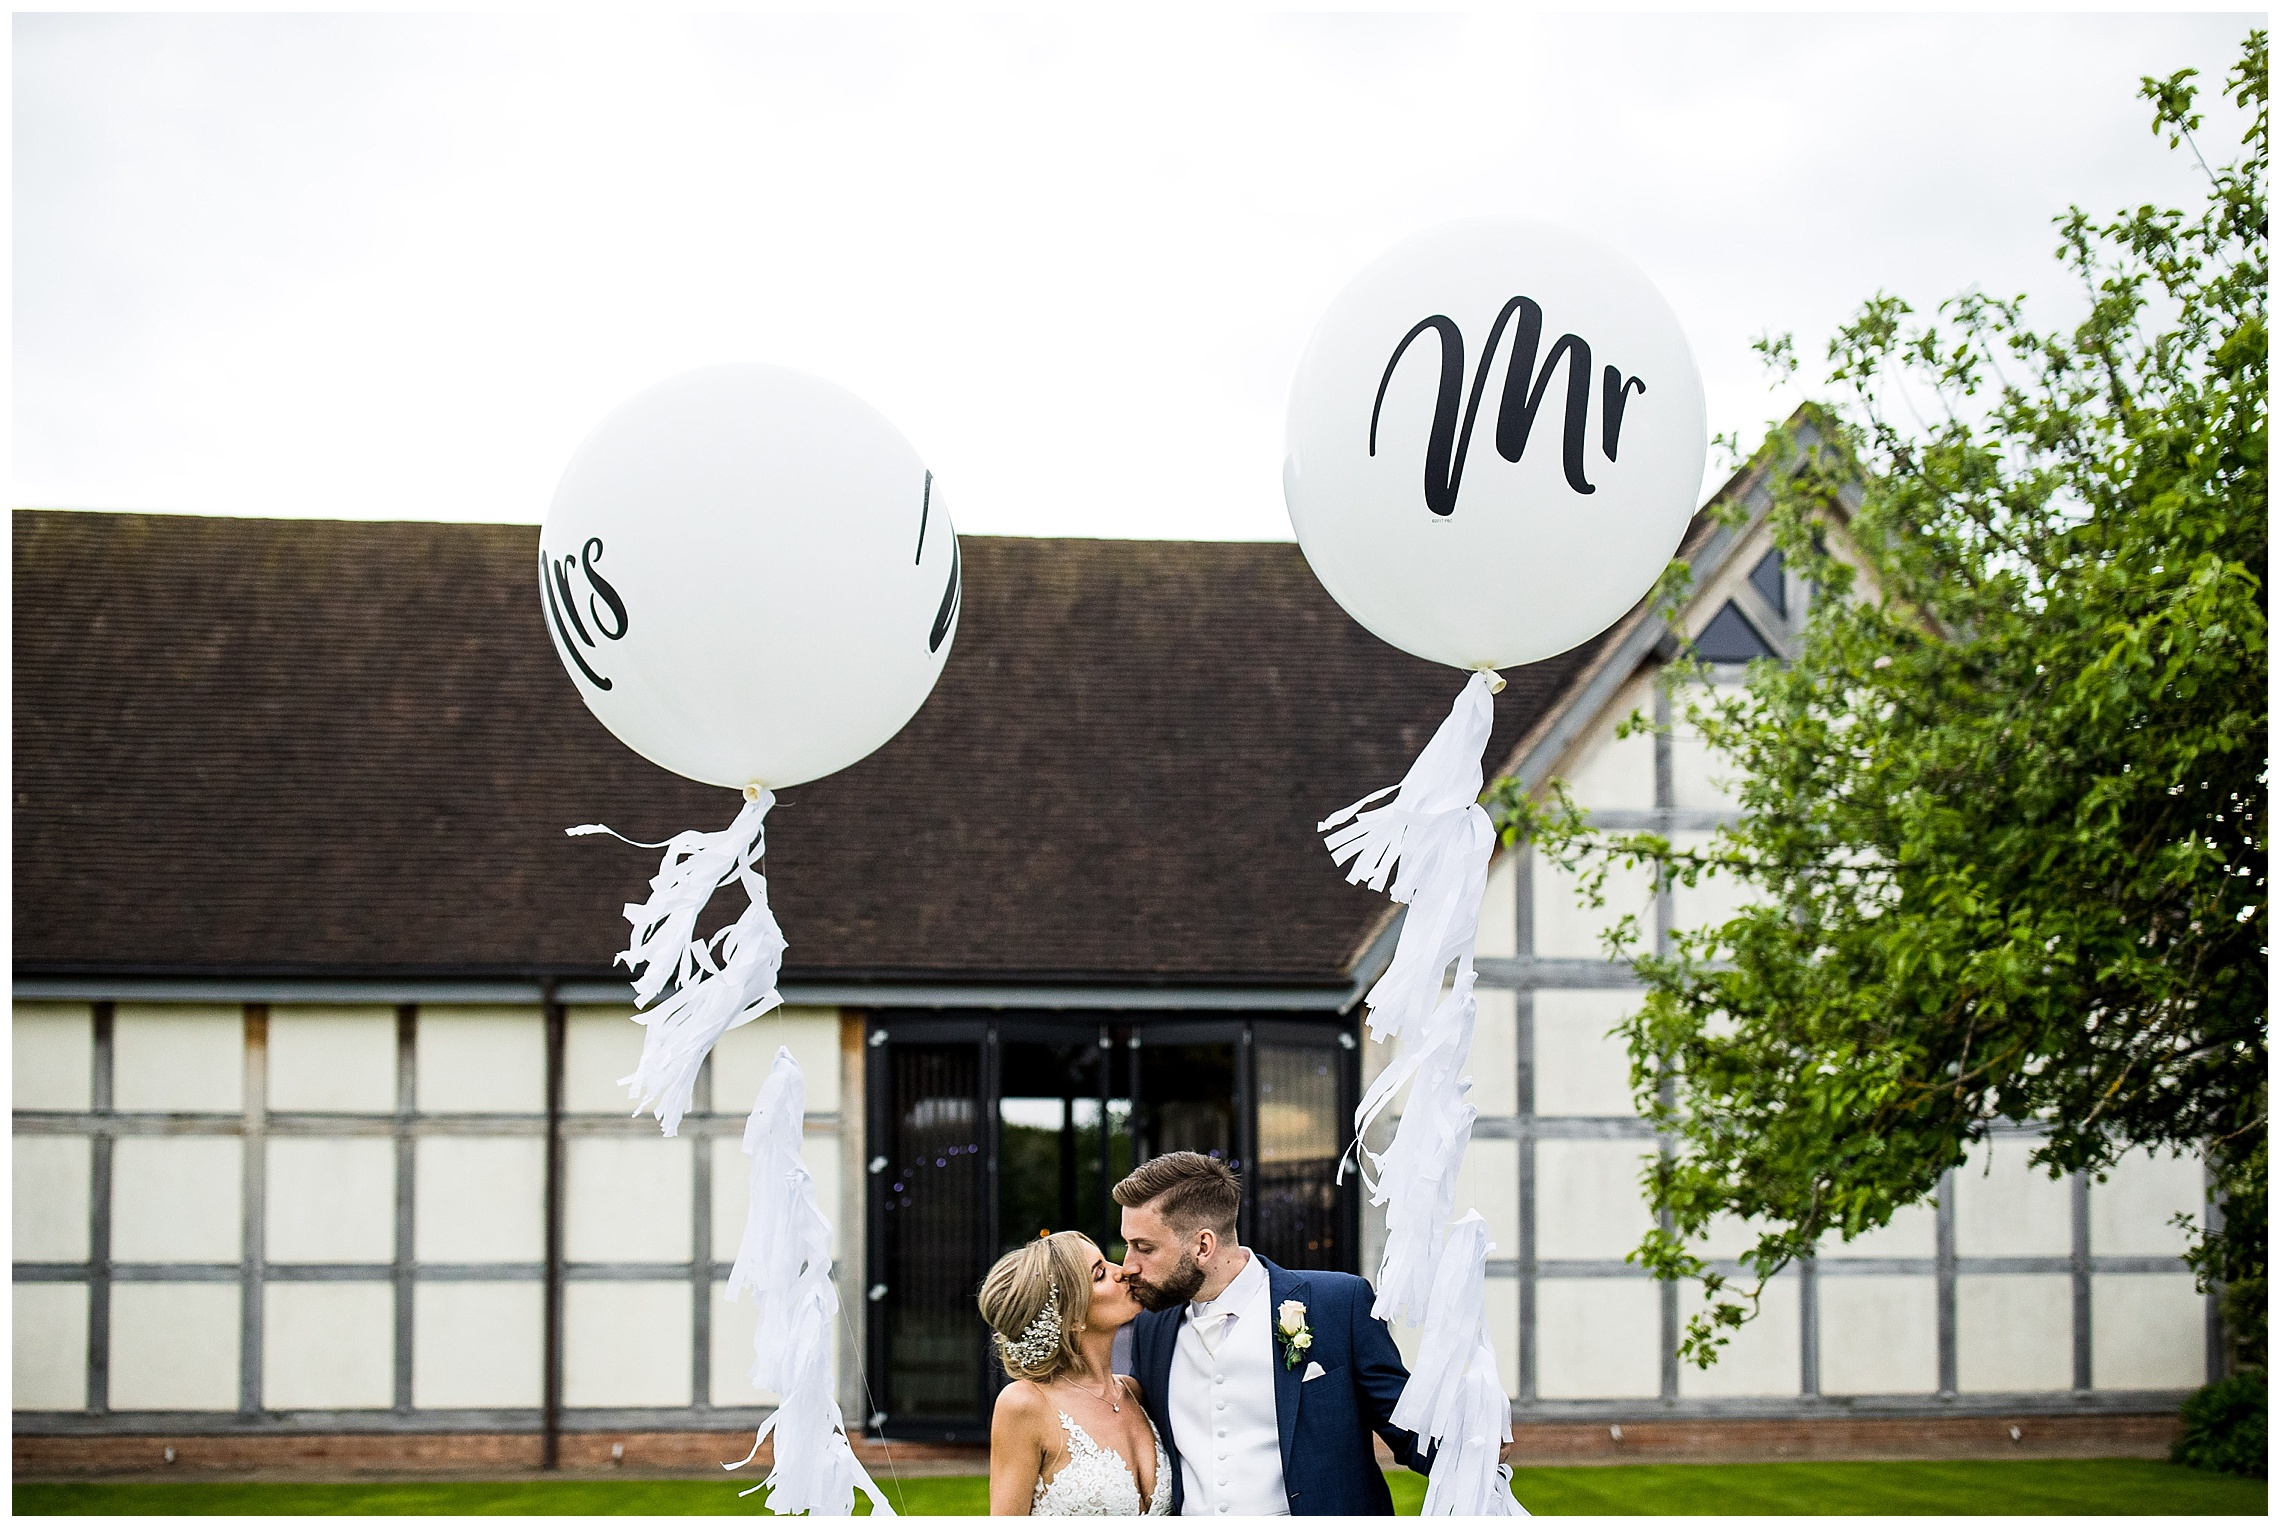 mr and mrs balloon with bride and groom outside redhouse barn